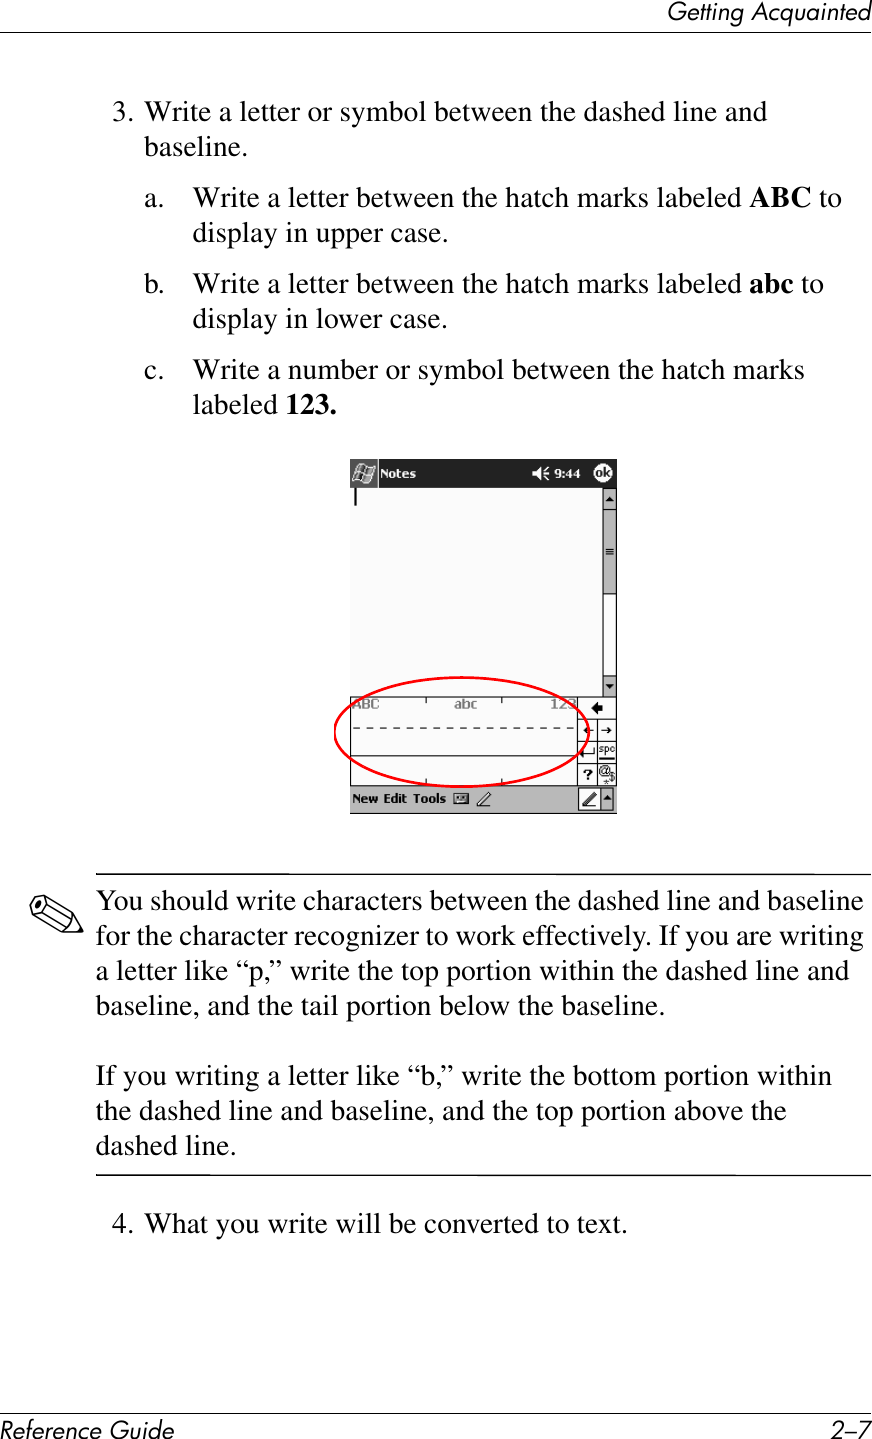 (&quot;11*%2&apos;&lt;&amp;T)4*%1&quot;+!&quot;#&quot;$&quot;%&amp;&quot;&apos;()*+&quot; 0/F3. Write a letter or symbol between the dashed line and baseline.a. Write a letter between the hatch marks labeled ABC to display in upper case.b. Write a letter between the hatch marks labeled abc to display in lower case.c. Write a number or symbol between the hatch marks labeled 123.✎You should write characters between the dashed line and baseline for the character recognizer to work effectively. If you are writing a letter like “p,” write the top portion within the dashed line and baseline, and the tail portion below the baseline.If you writing a letter like “b,” write the bottom portion within the dashed line and baseline, and the top portion above the dashed line.4. What you write will be converted to text.